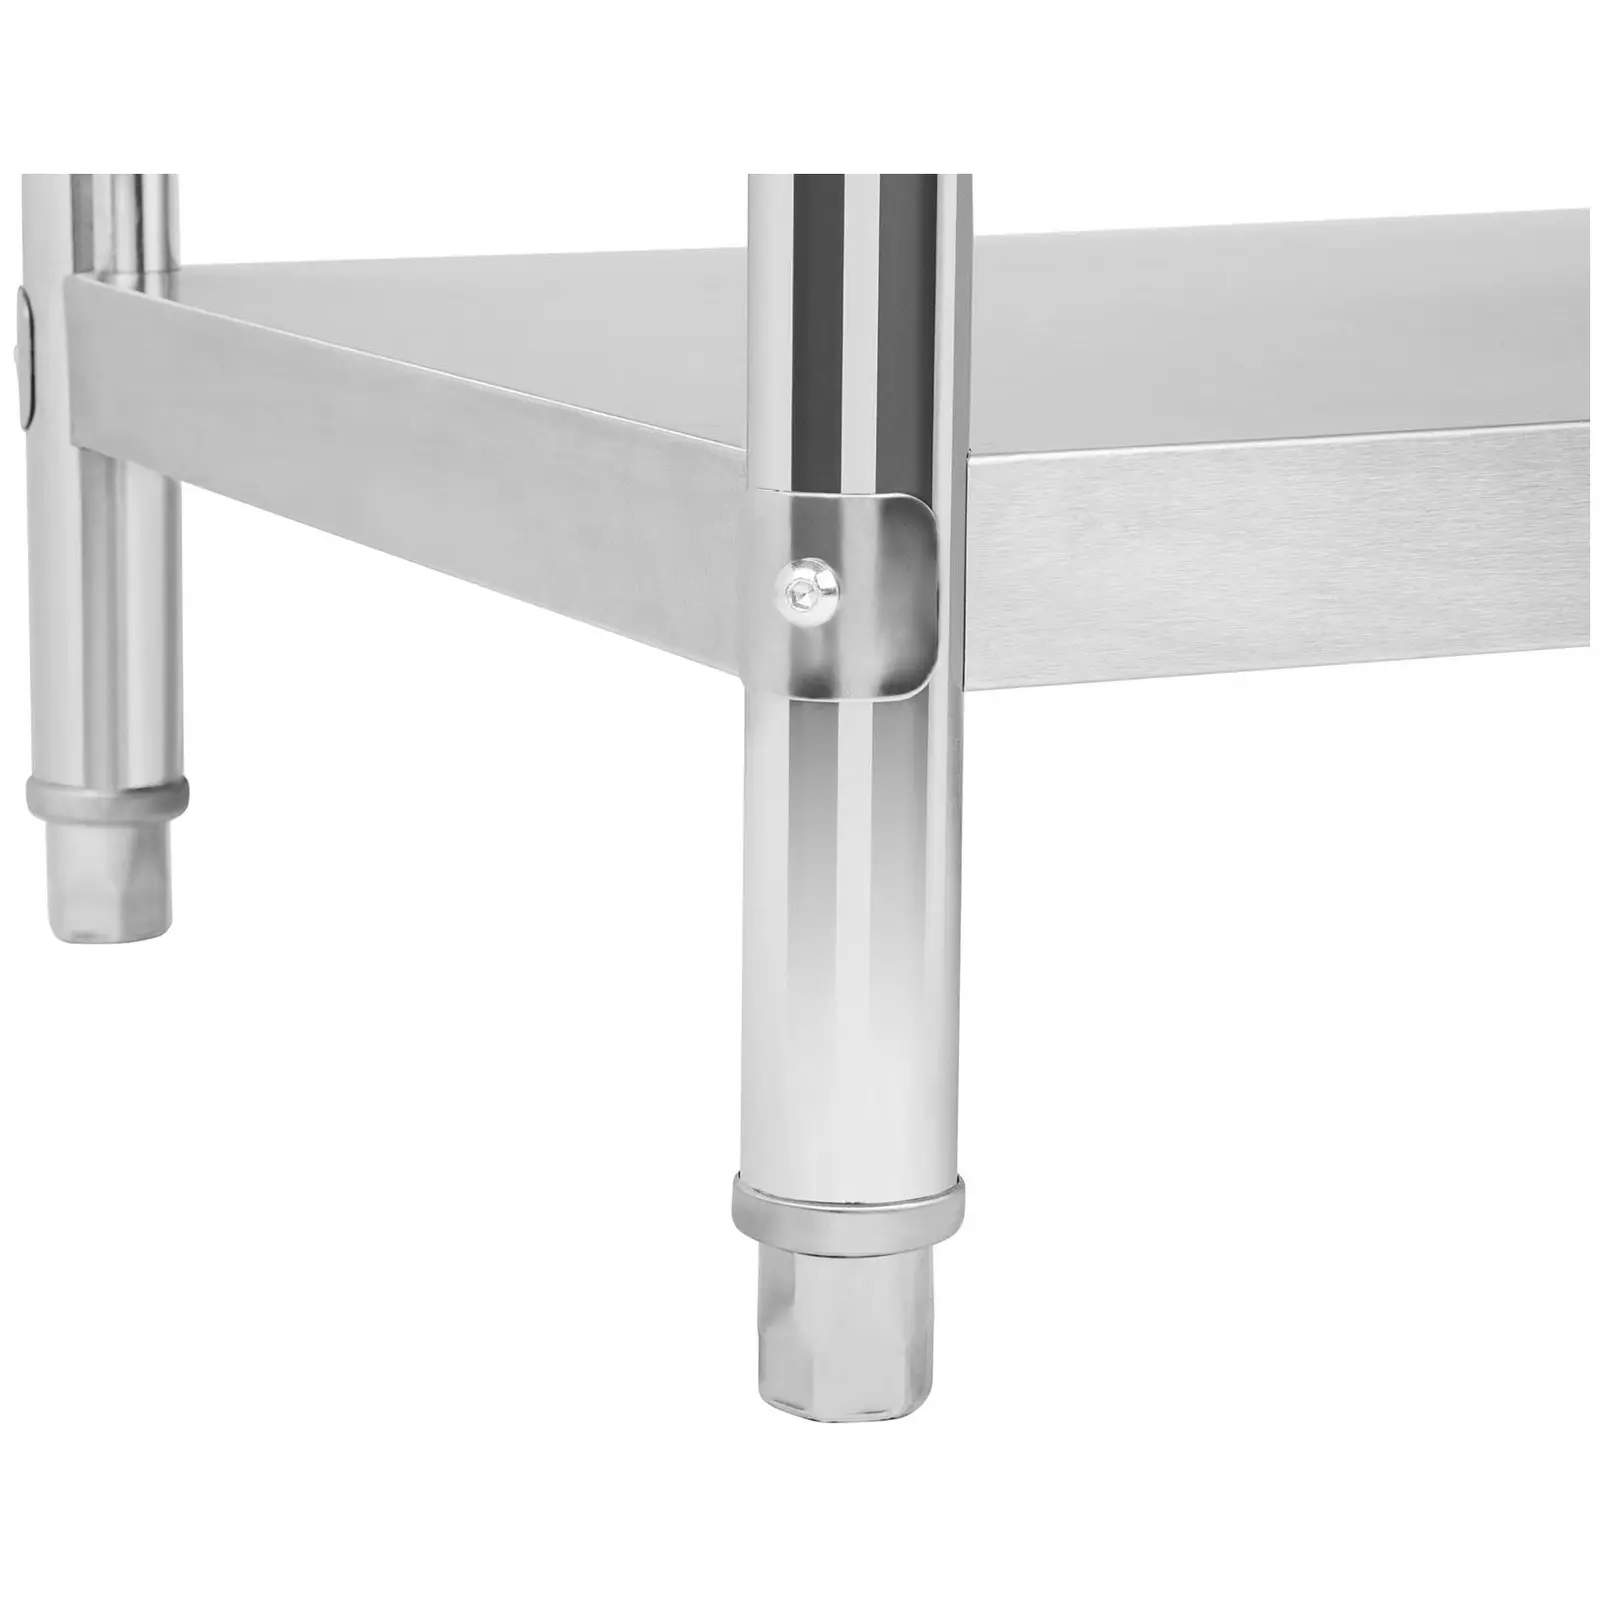 Stainless Steel Table - 100 x 60 cm - 114 kg load capacity